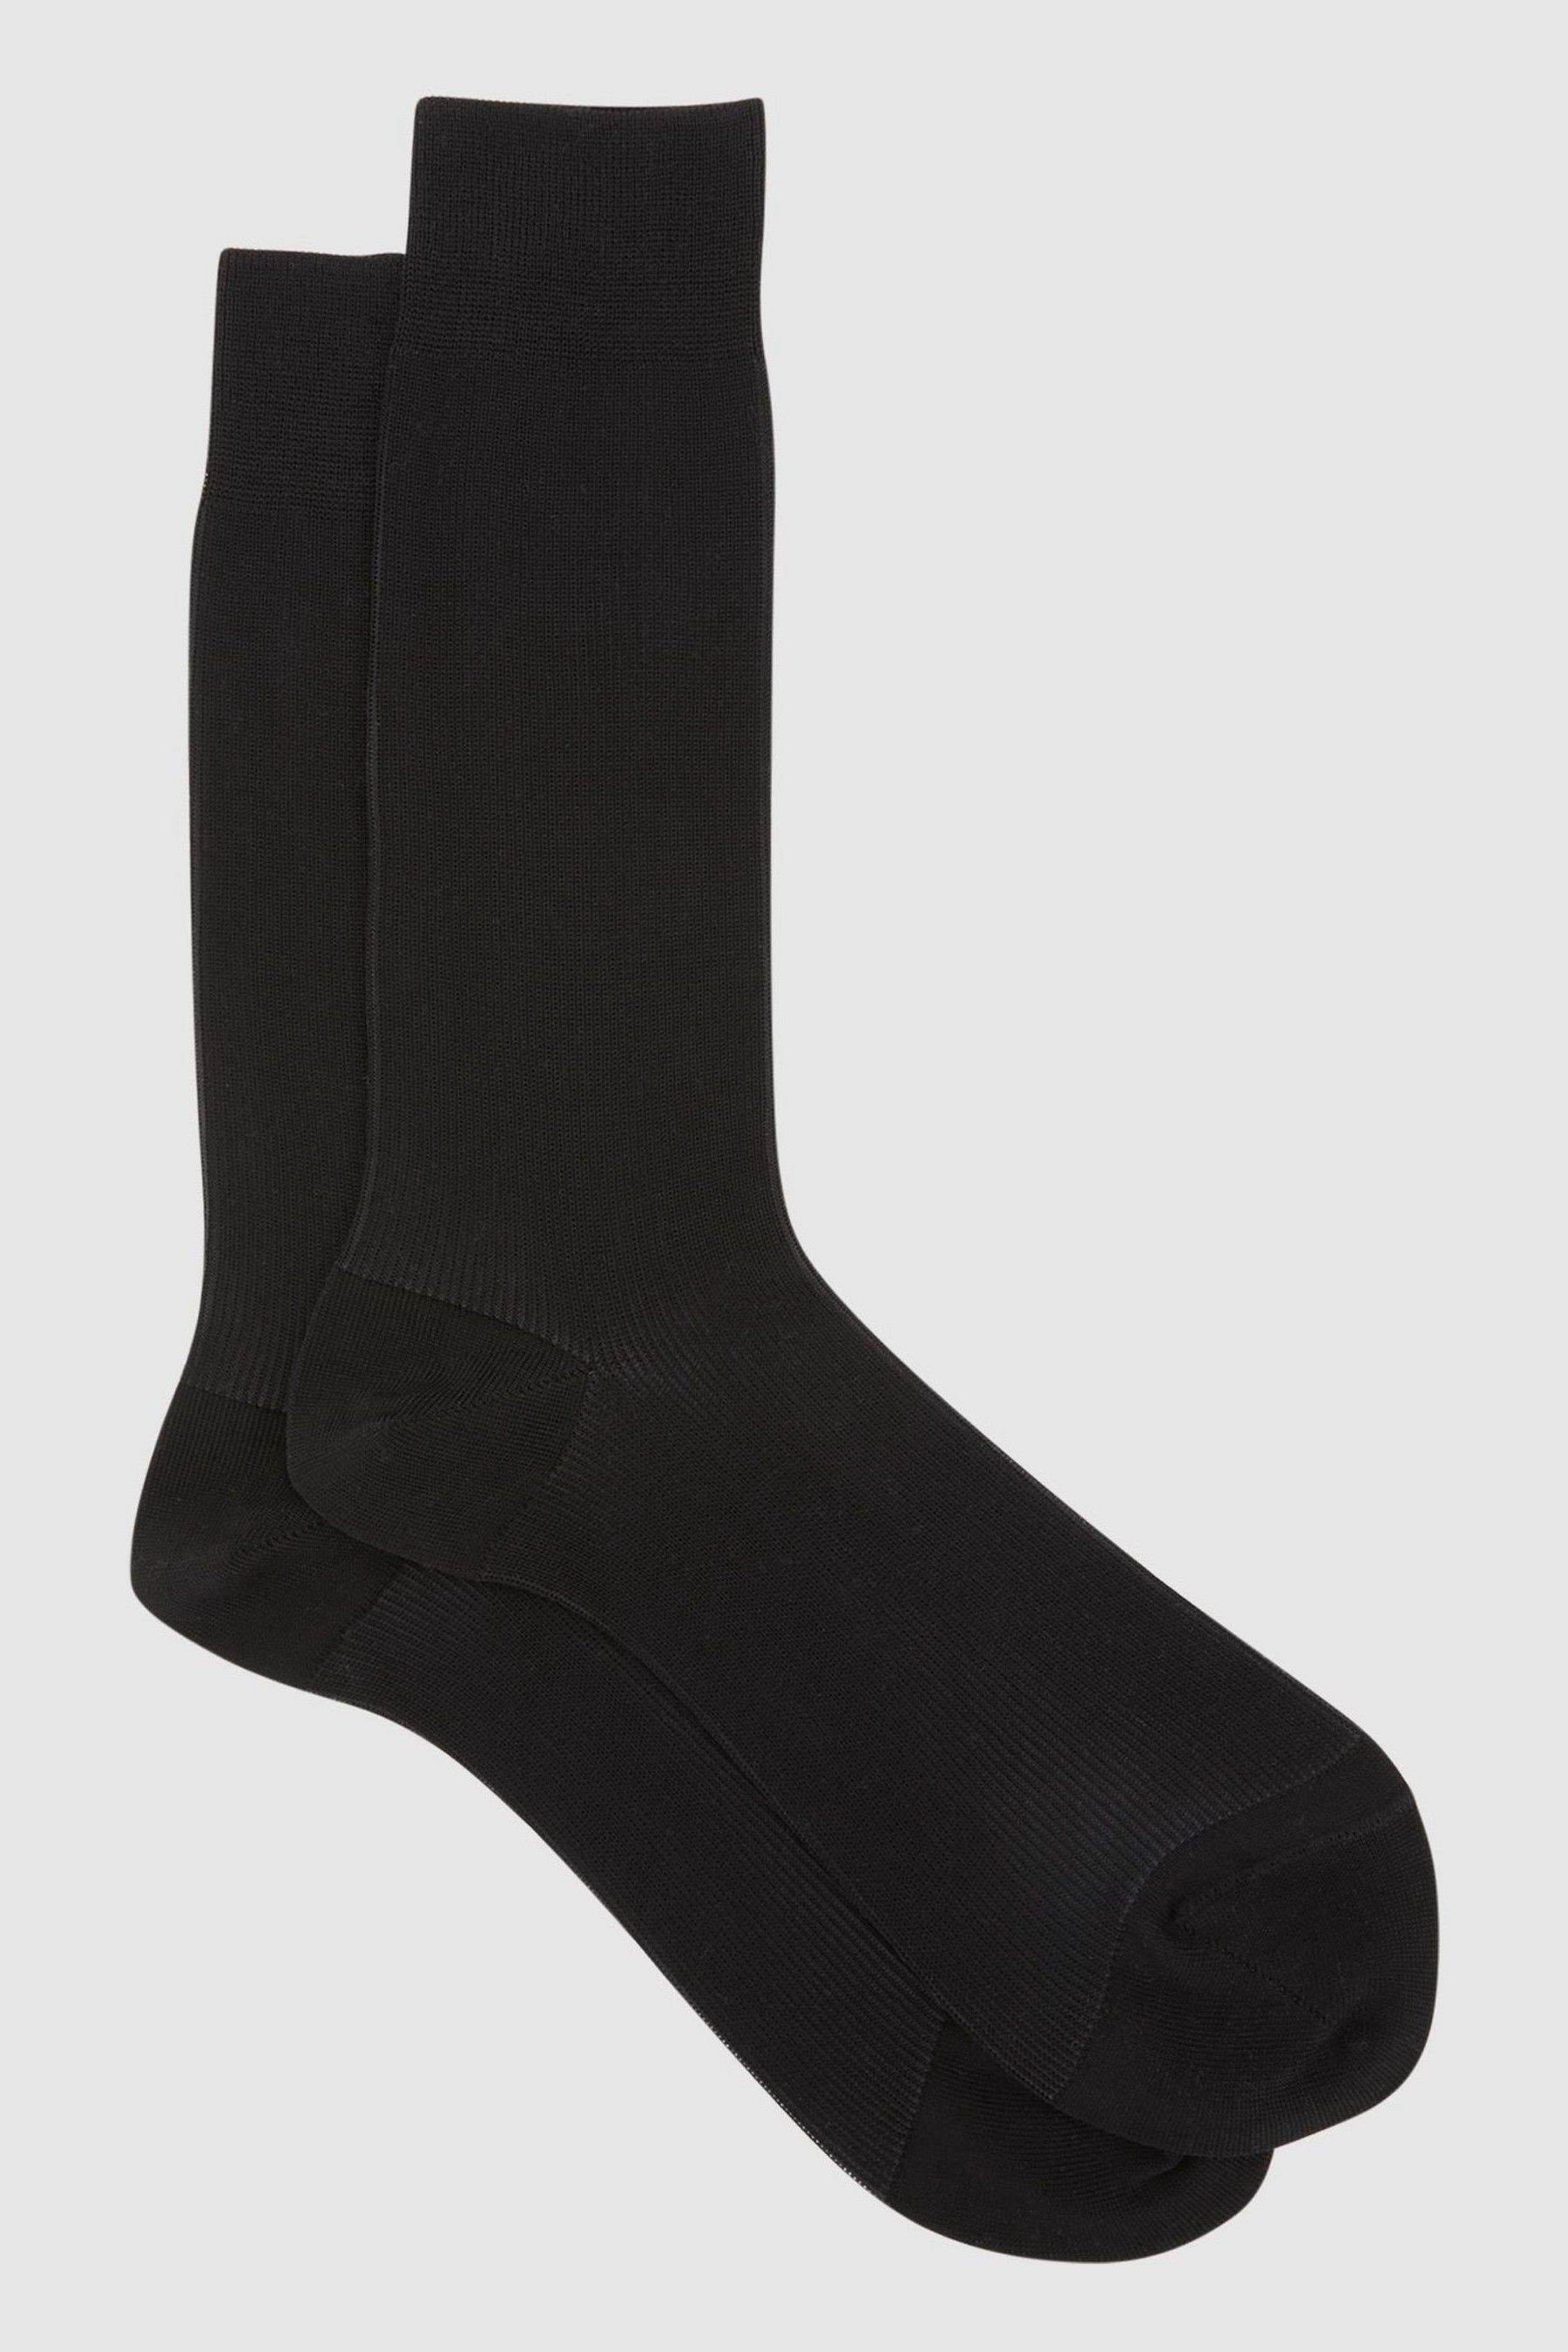 Buy Reiss Black Cory Two Tone Cotton Socks from the Next UK online shop